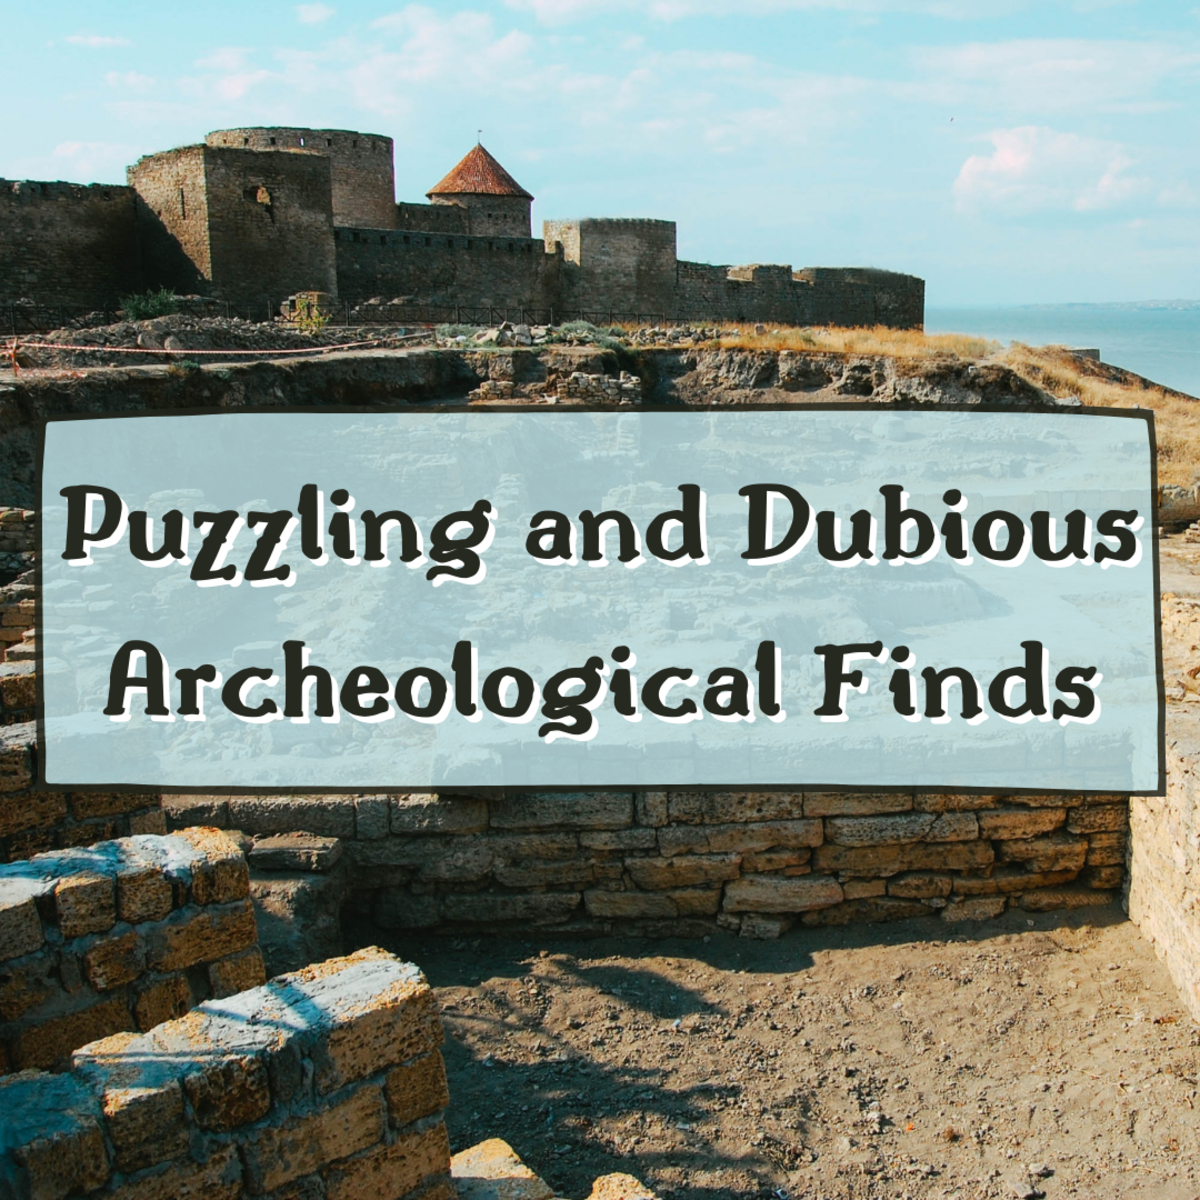 Puzzling and Dubious Archeological Finds